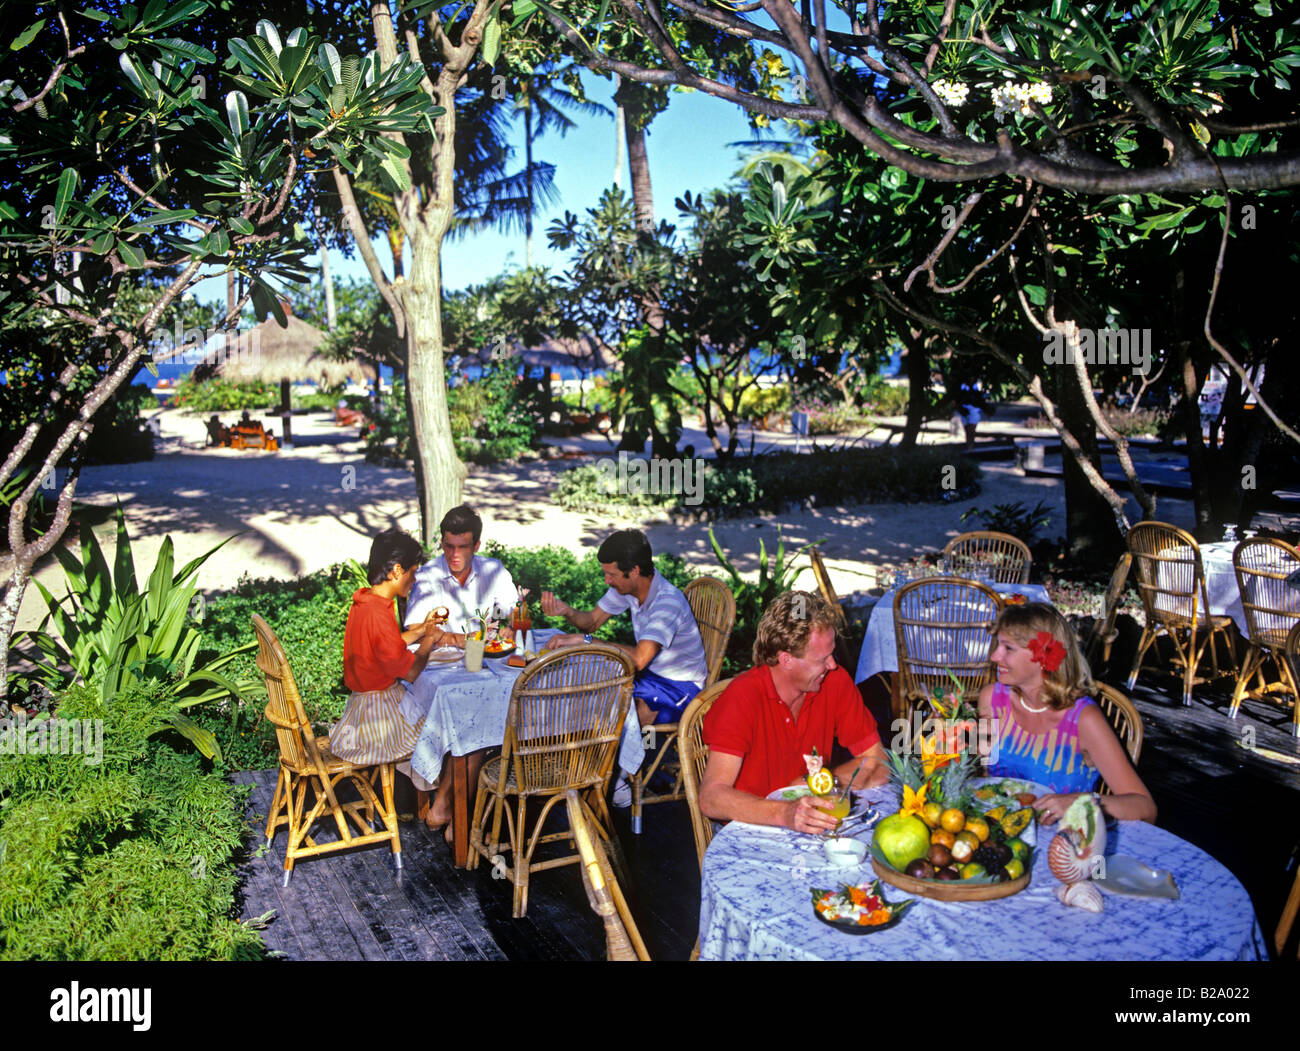 Beach cafe Bali Indonesia Date 28 03 2008 Ref WP B548 111653 0004 COMPULSORY CREDIT World Pictures Photoshot Stock Photo